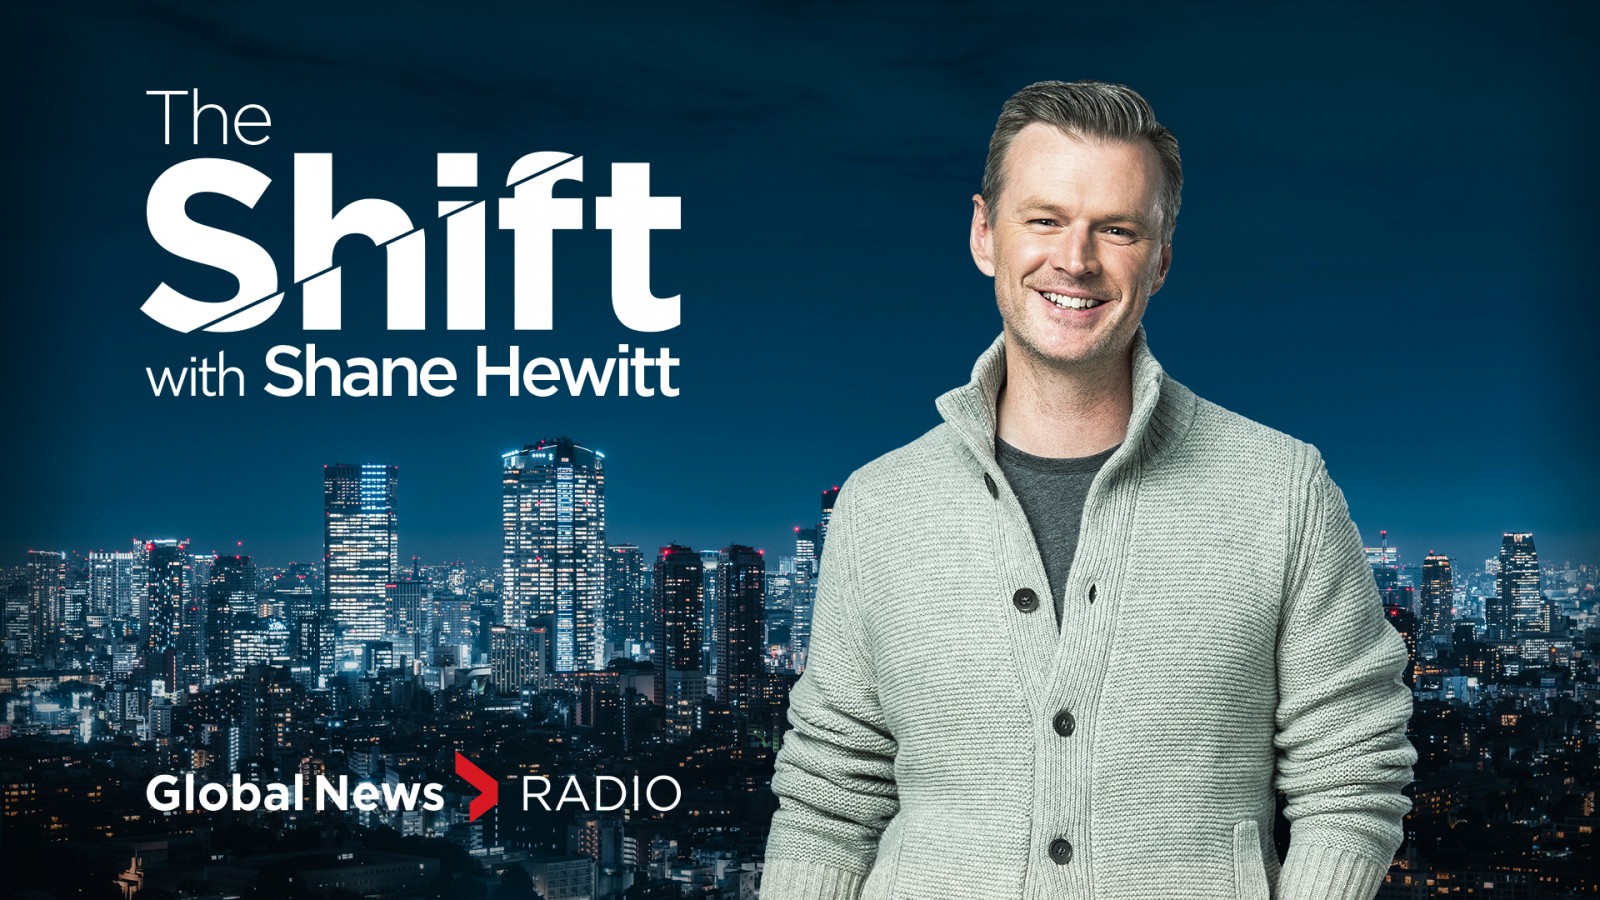 The Shift with Shane Hewitt